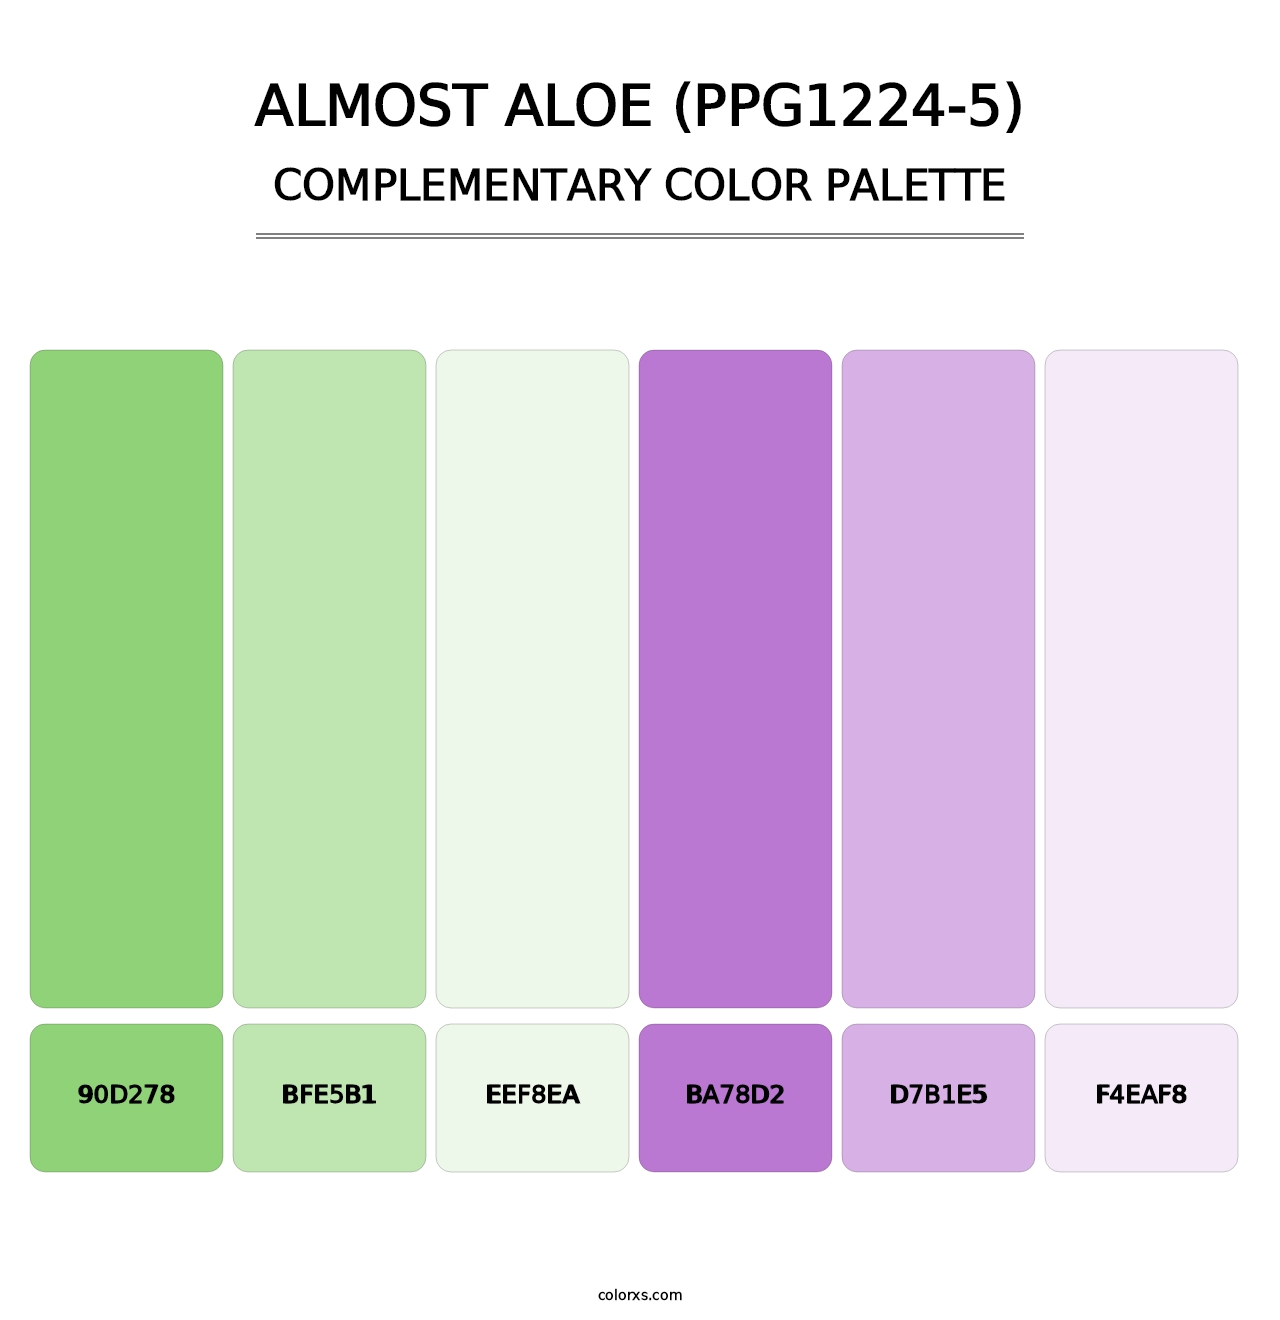 Almost Aloe (PPG1224-5) - Complementary Color Palette